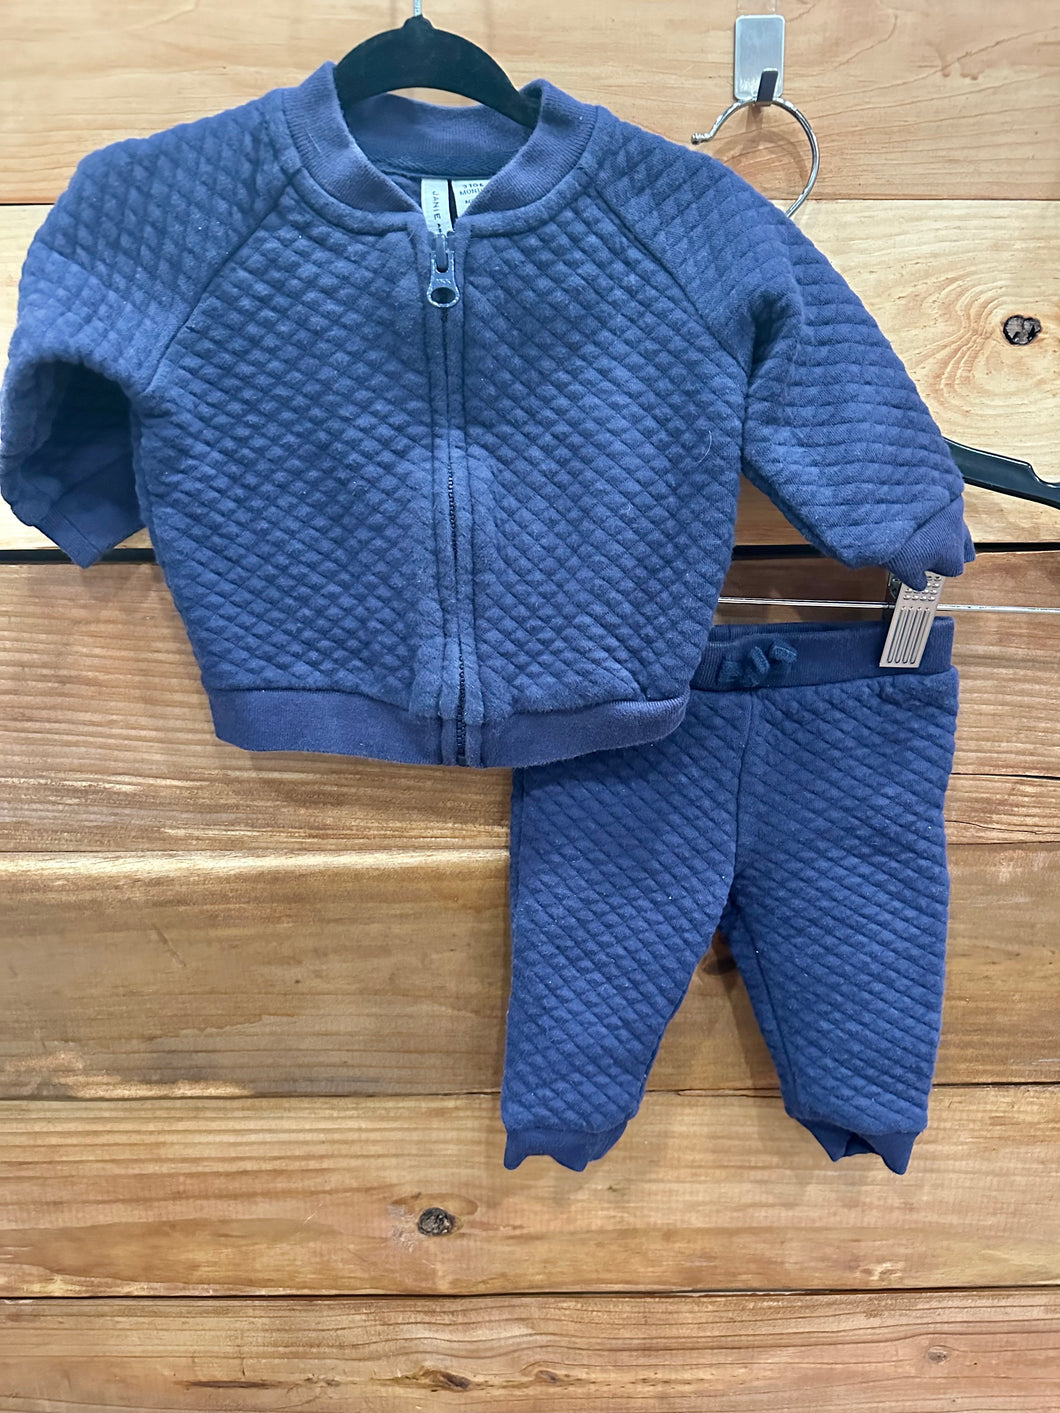 Janie & Jack Blue Quilted 2pc Outfit Size 3-6m